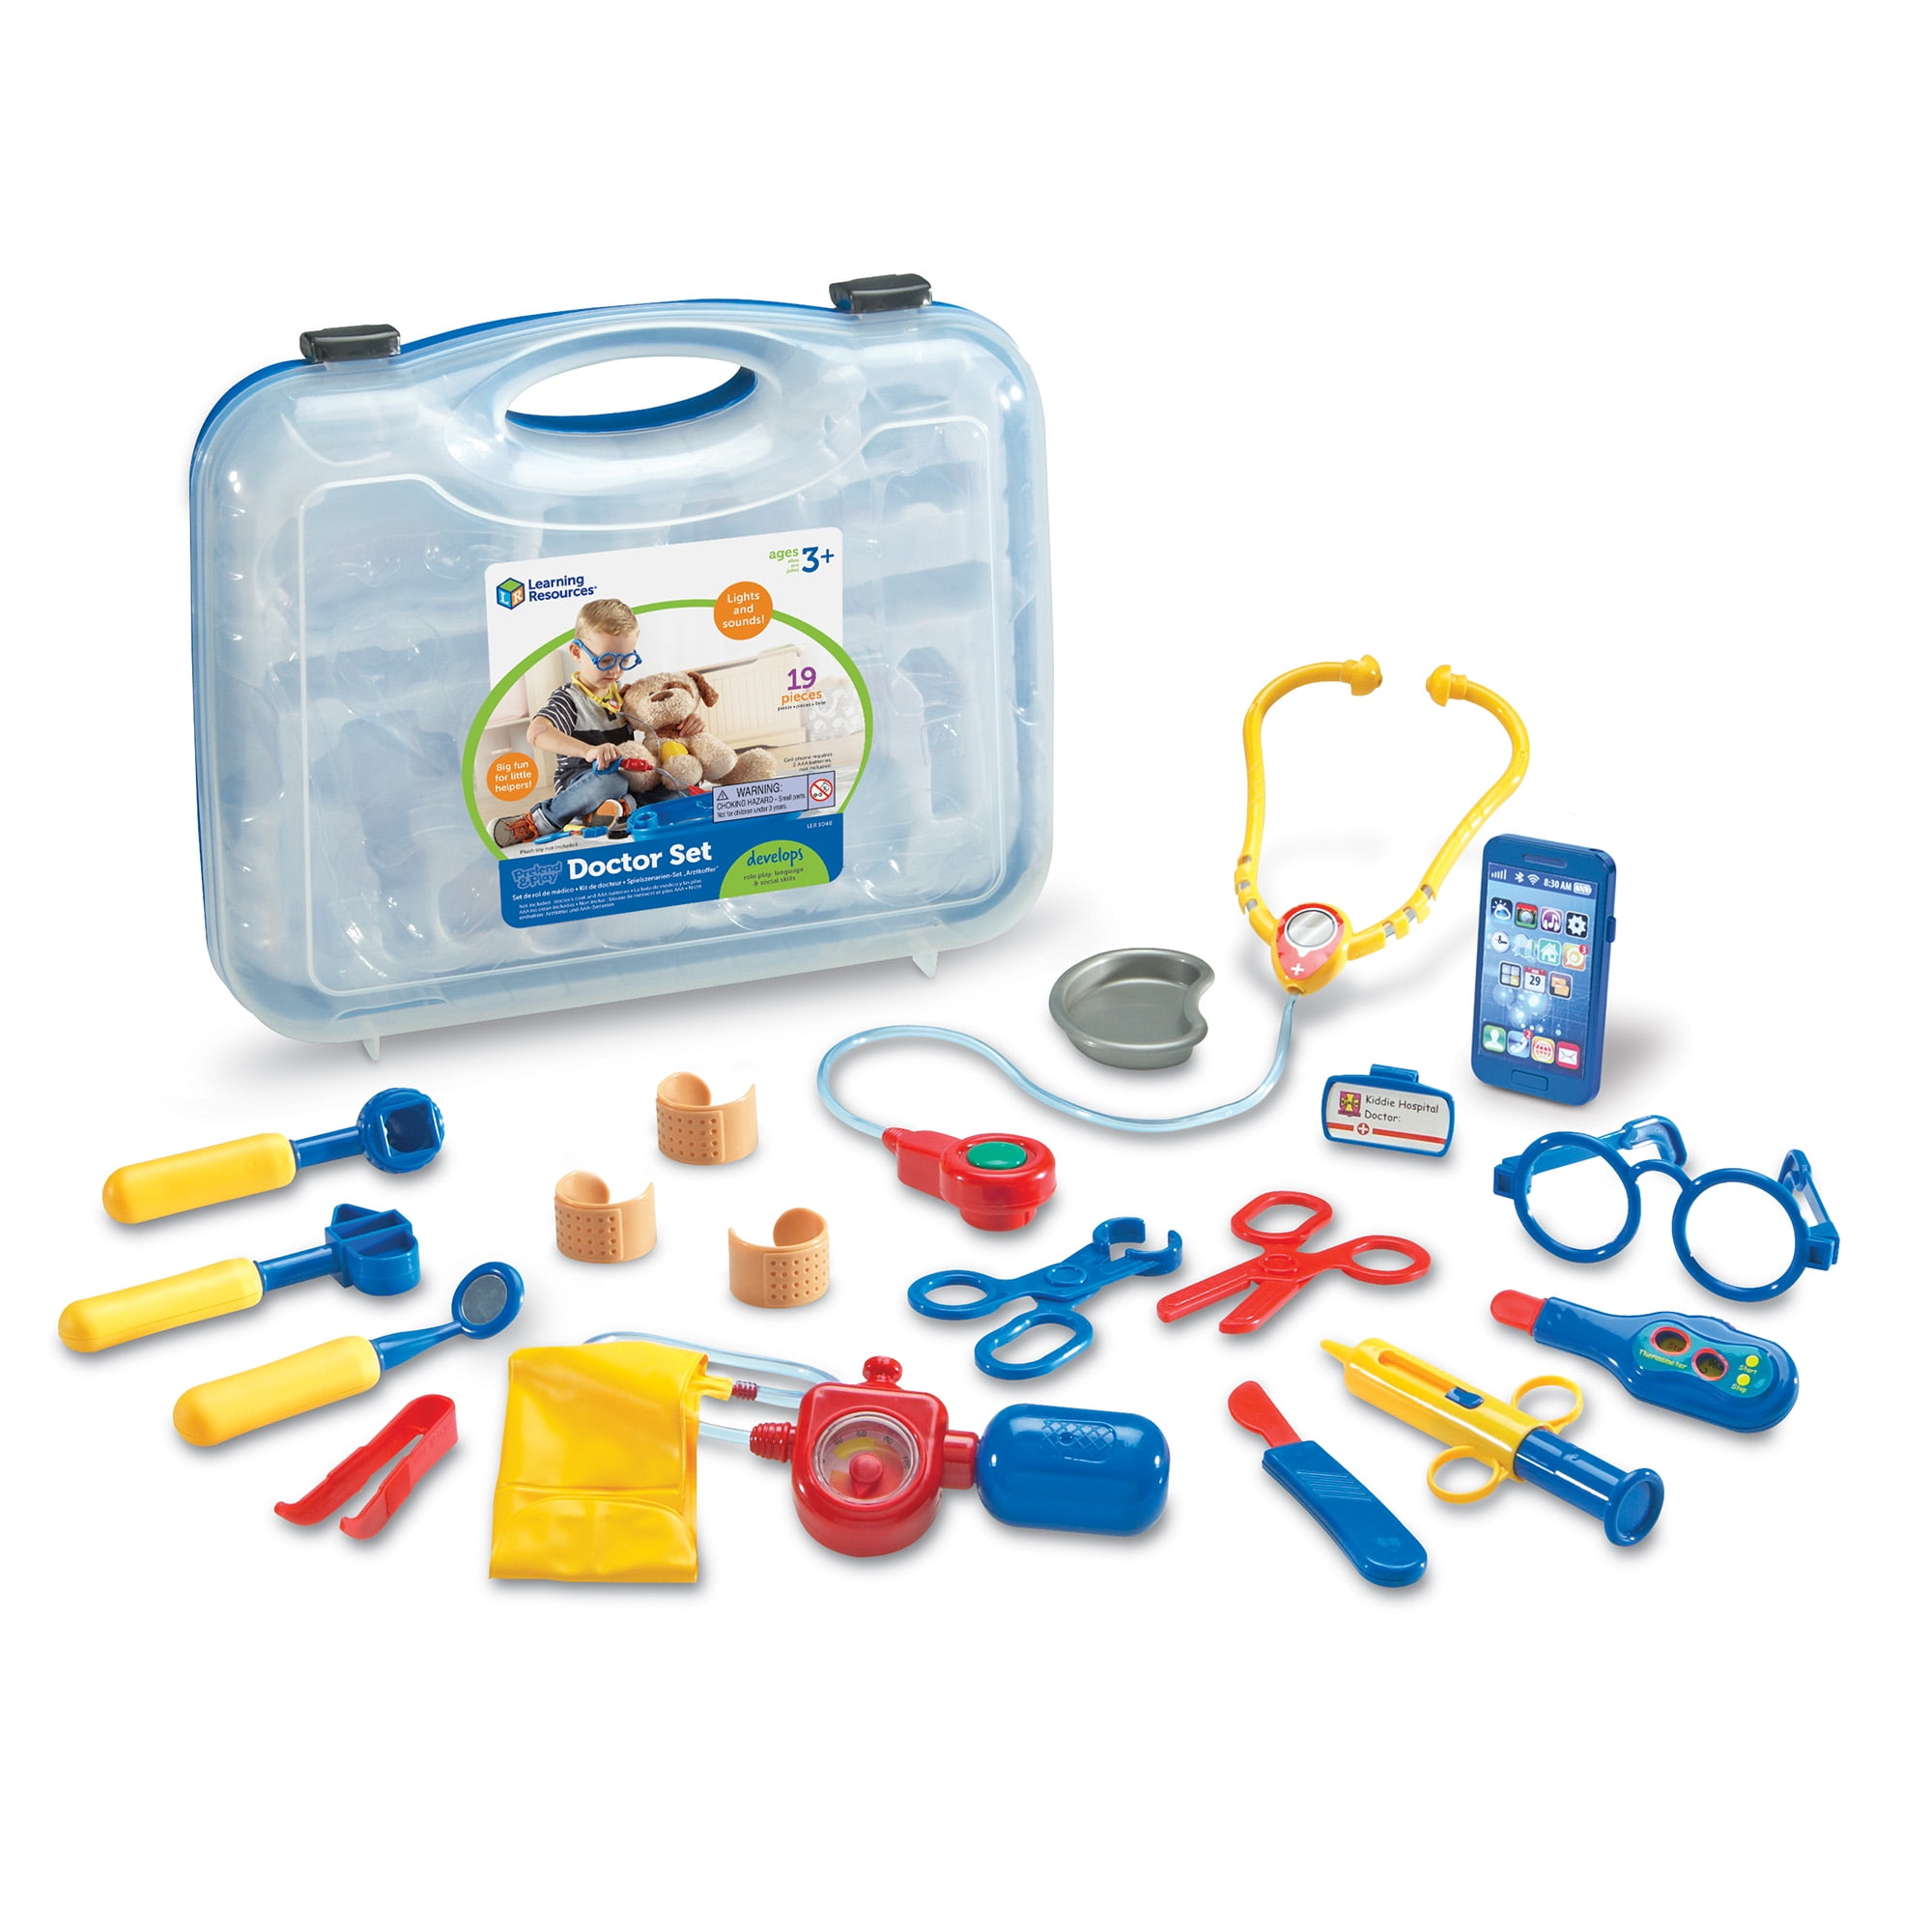 Toy Kids Battat Deluxe Doctor Medical Kit for 11pcs Xmas Play Gift Sturdy for sale online 